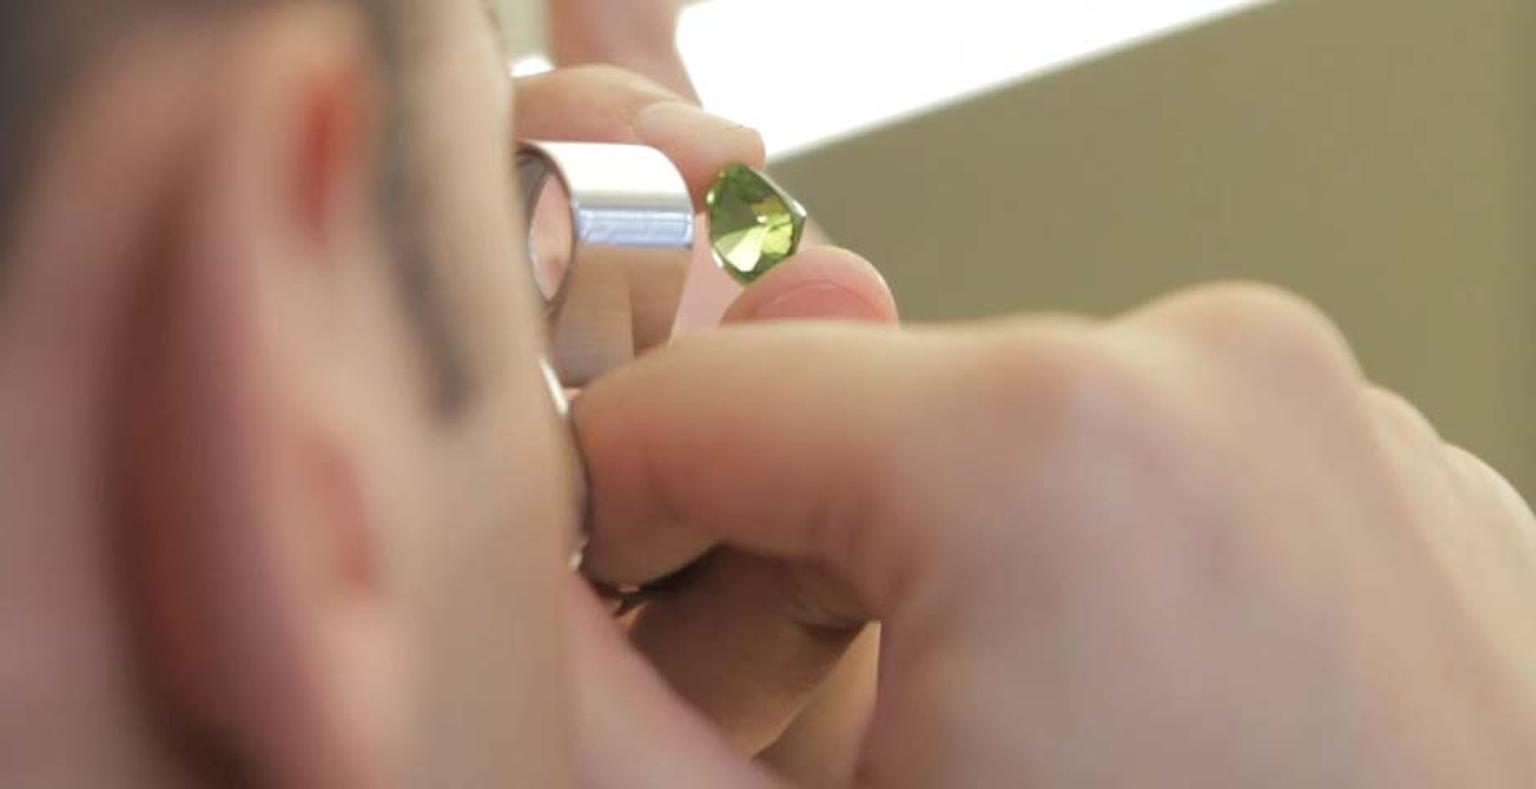 Examining a gemstone through a jewellery loupe at Van Cleef & Arpels L'Ecole